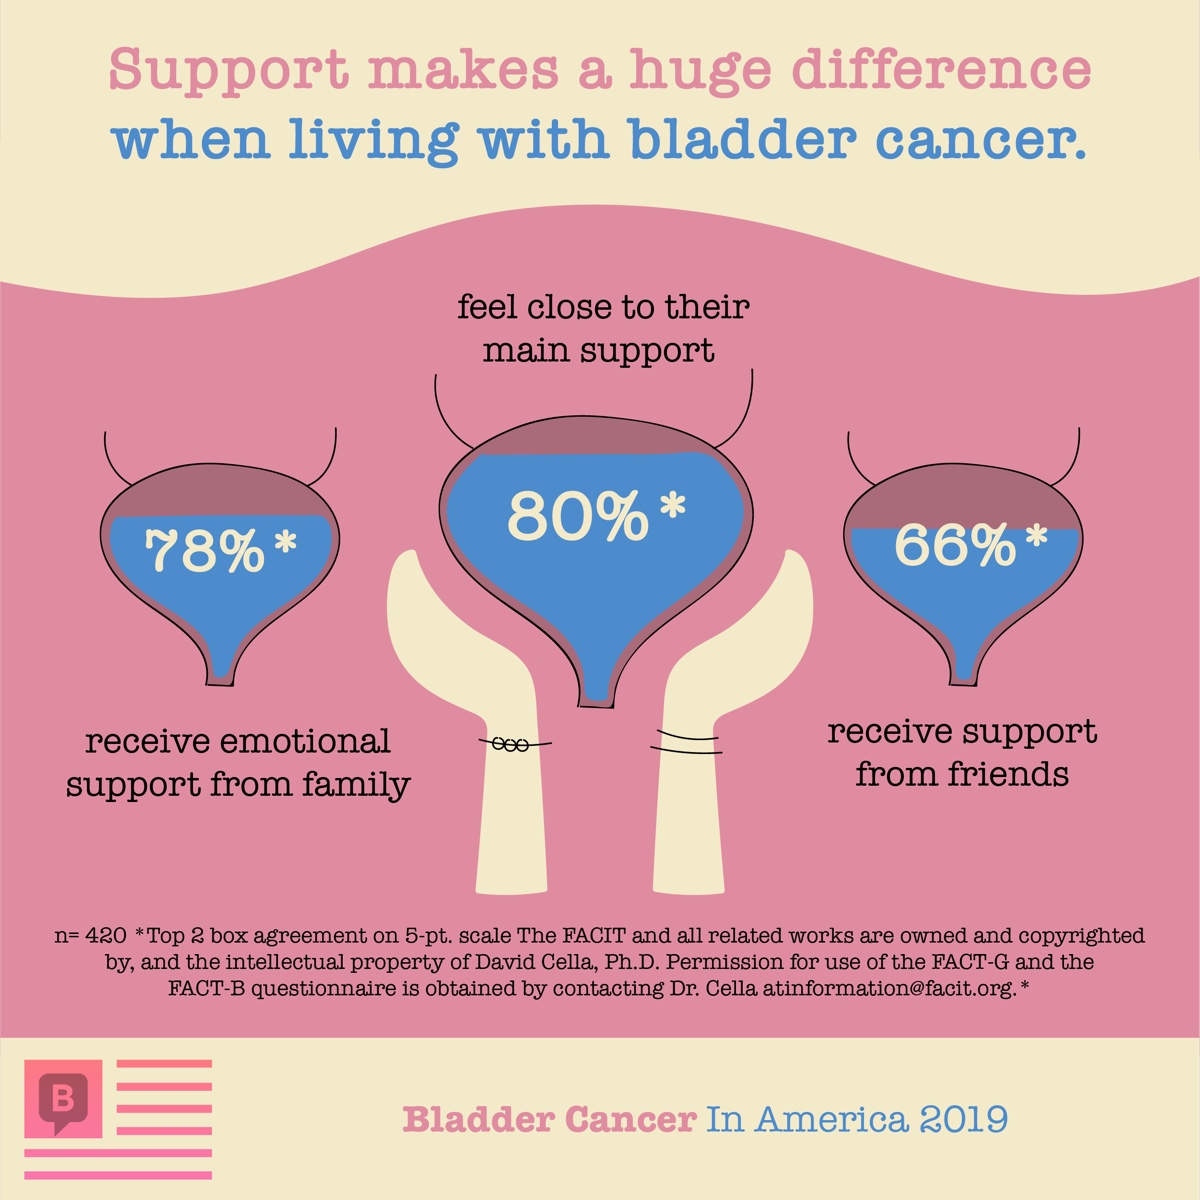 People with bladder cancer receive support from family (78%) and friends (66%)